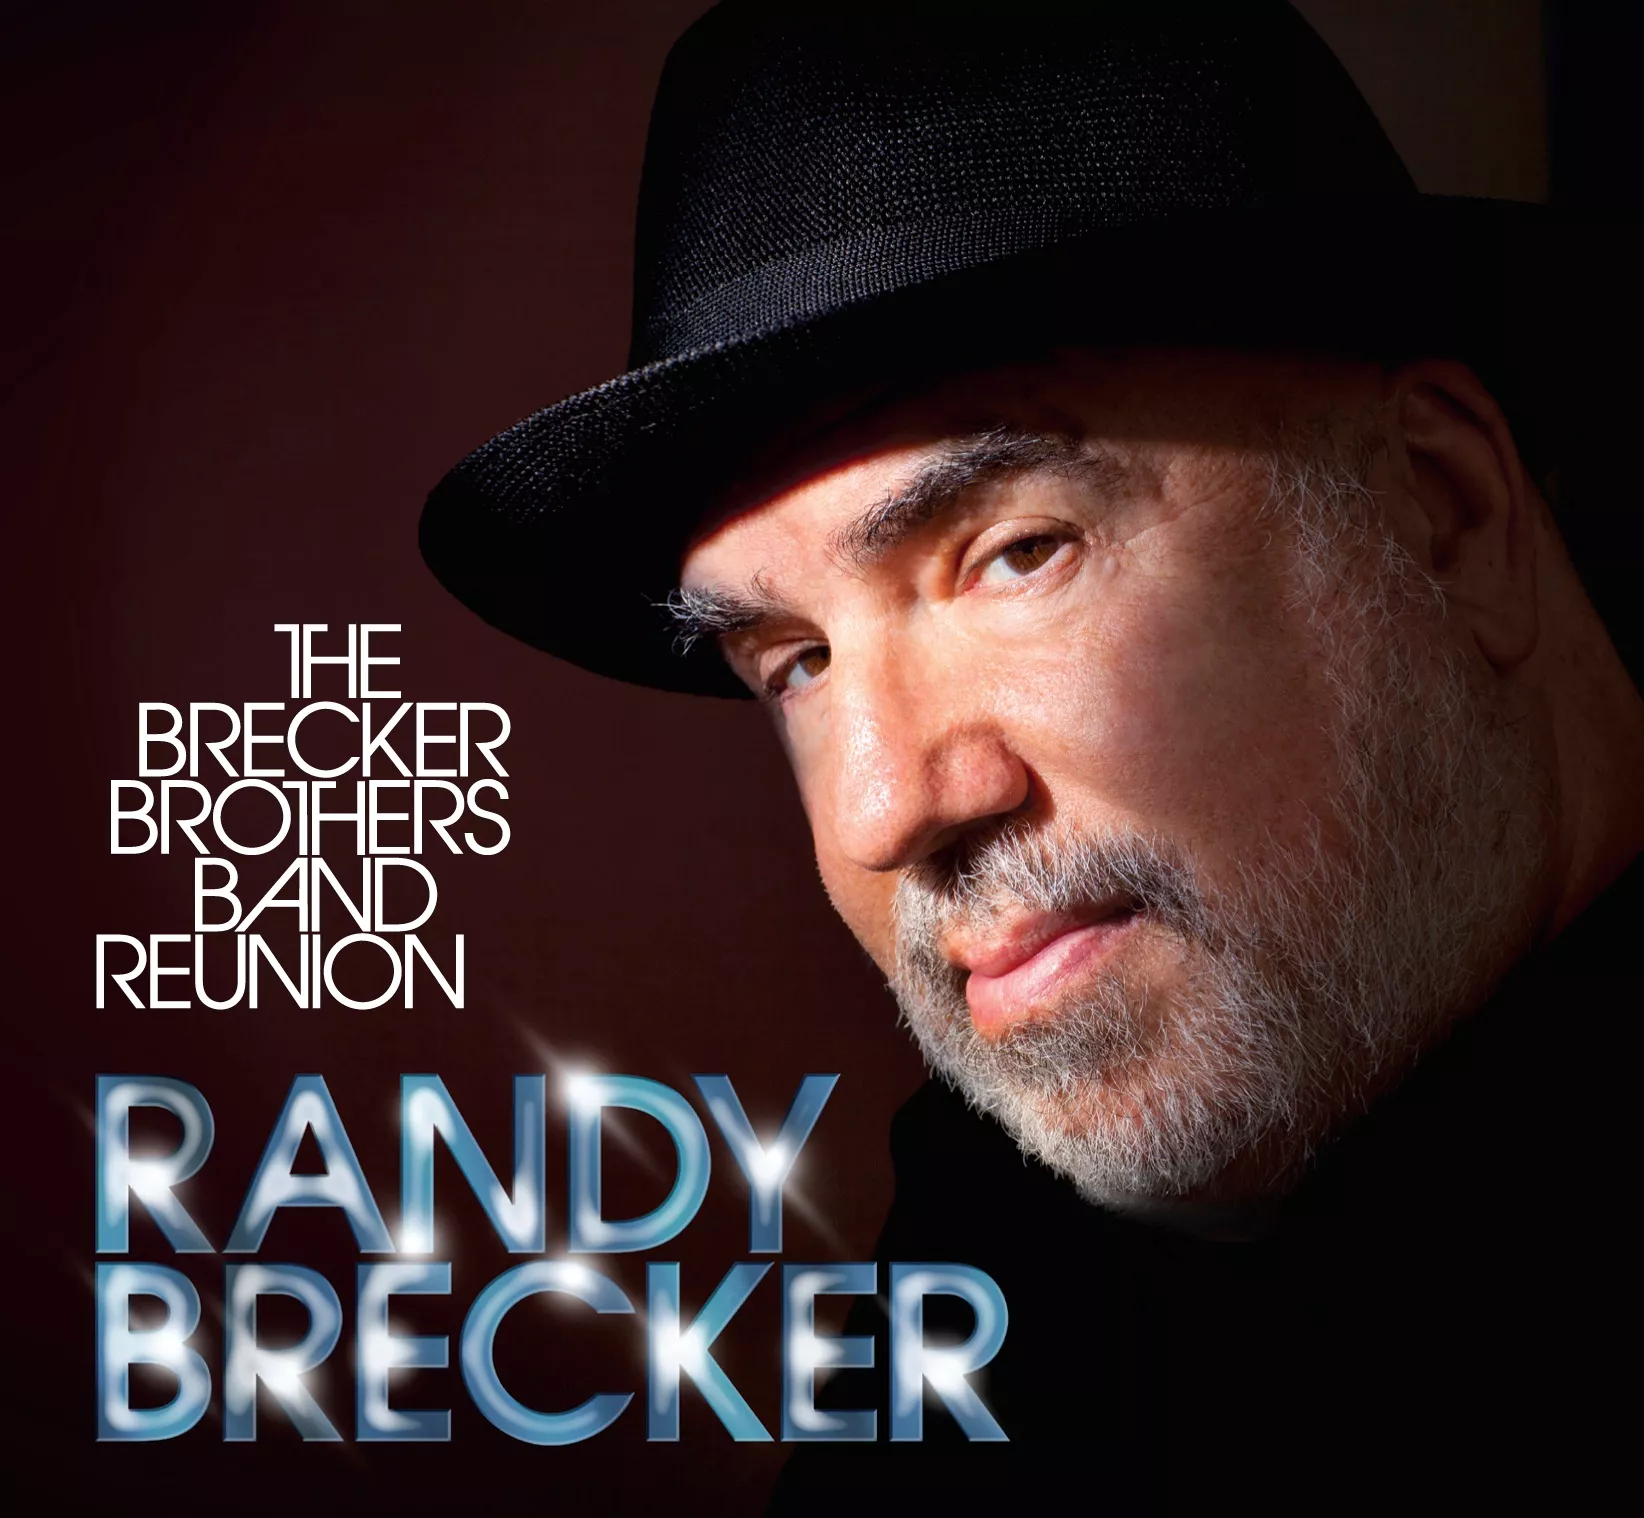 The Brecker Brothers Band Reunion - Randy Brecker